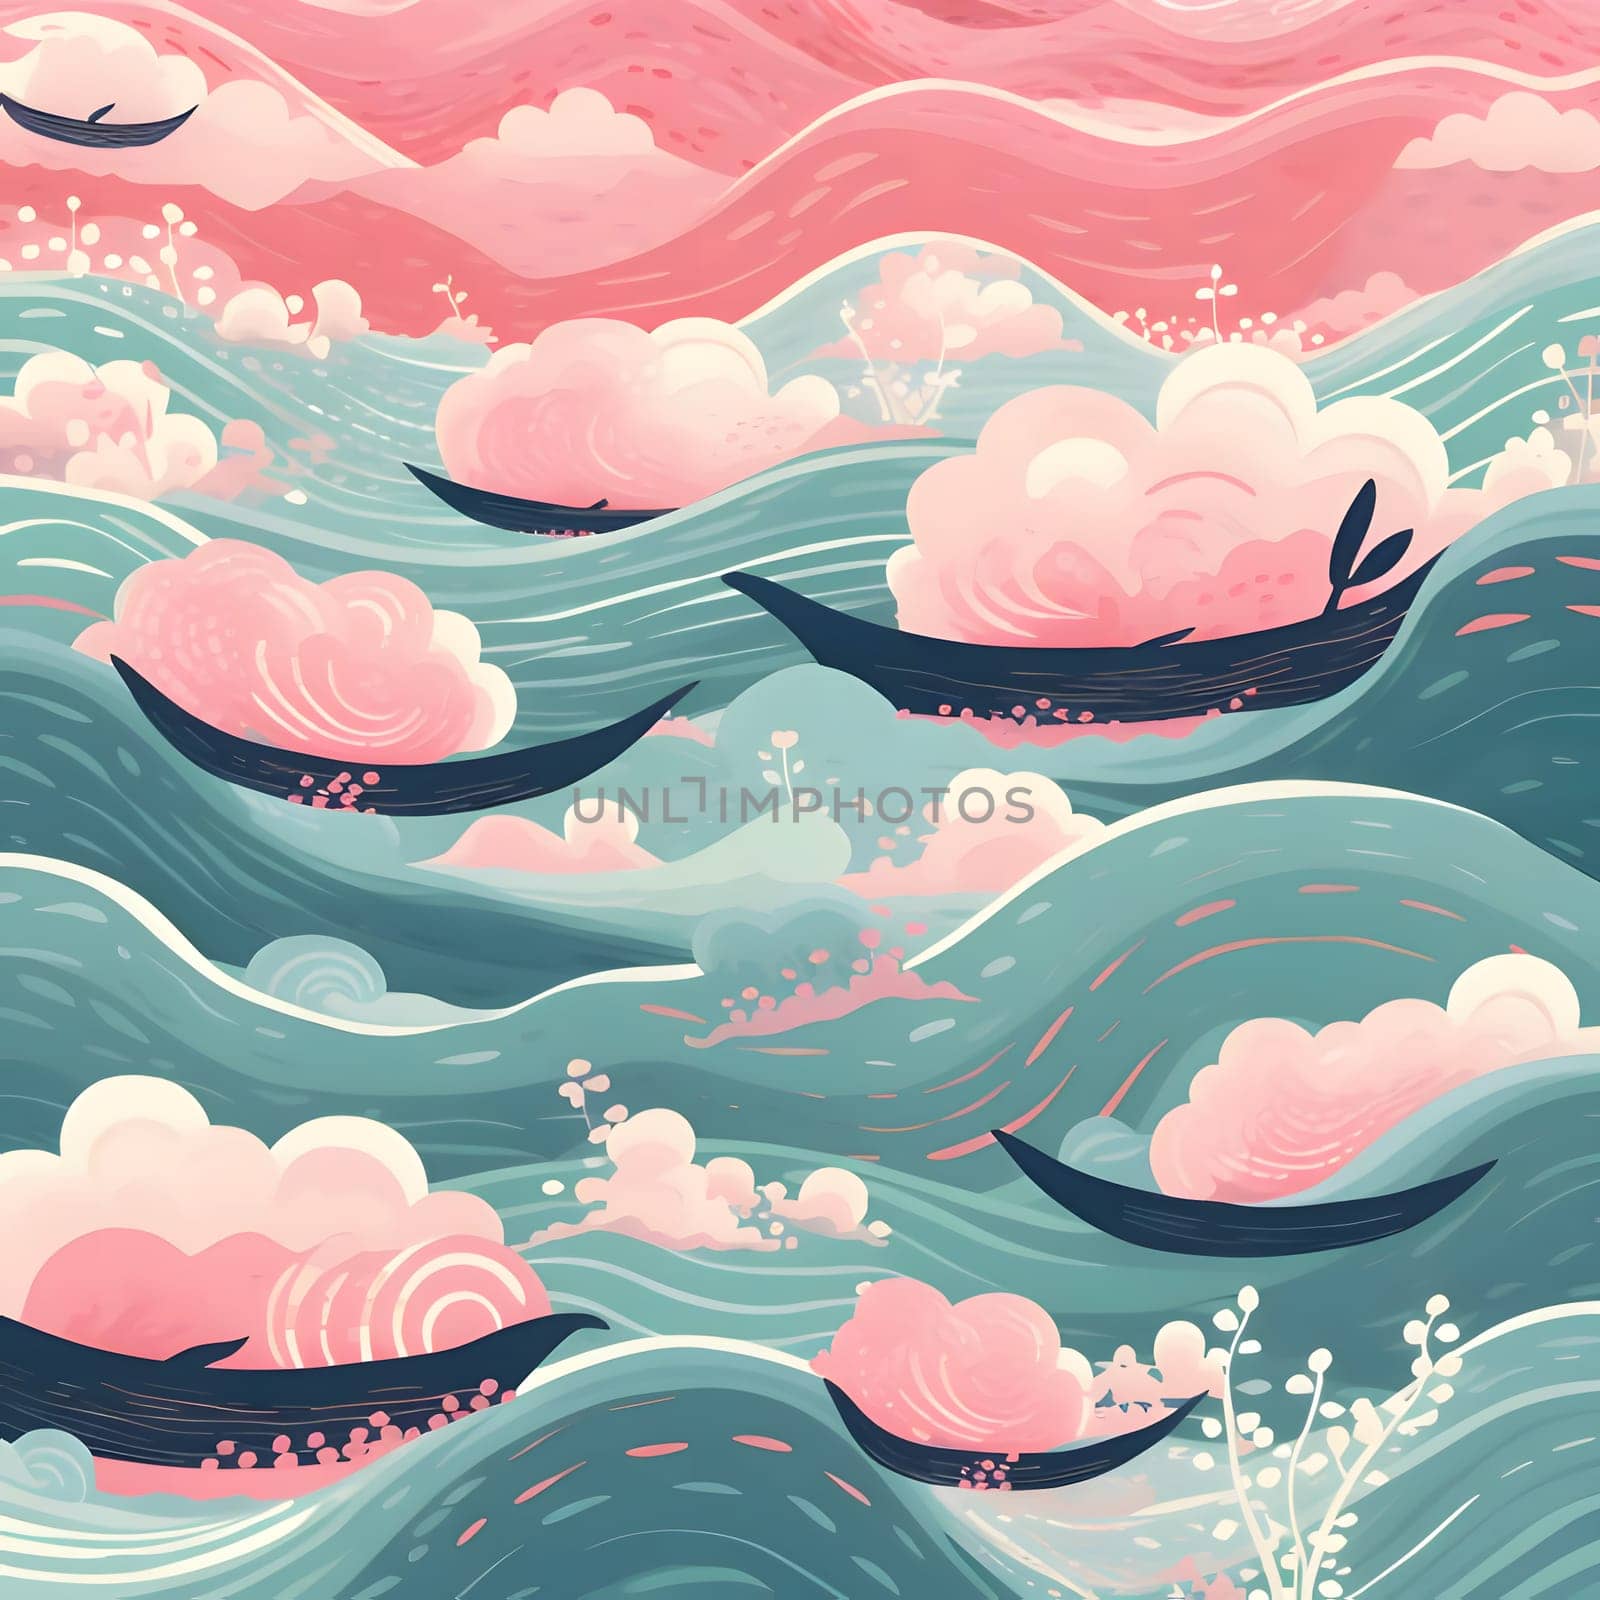 Patterns and banners backgrounds: Seamless pattern with whales and clouds. Vector illustration in retro style.